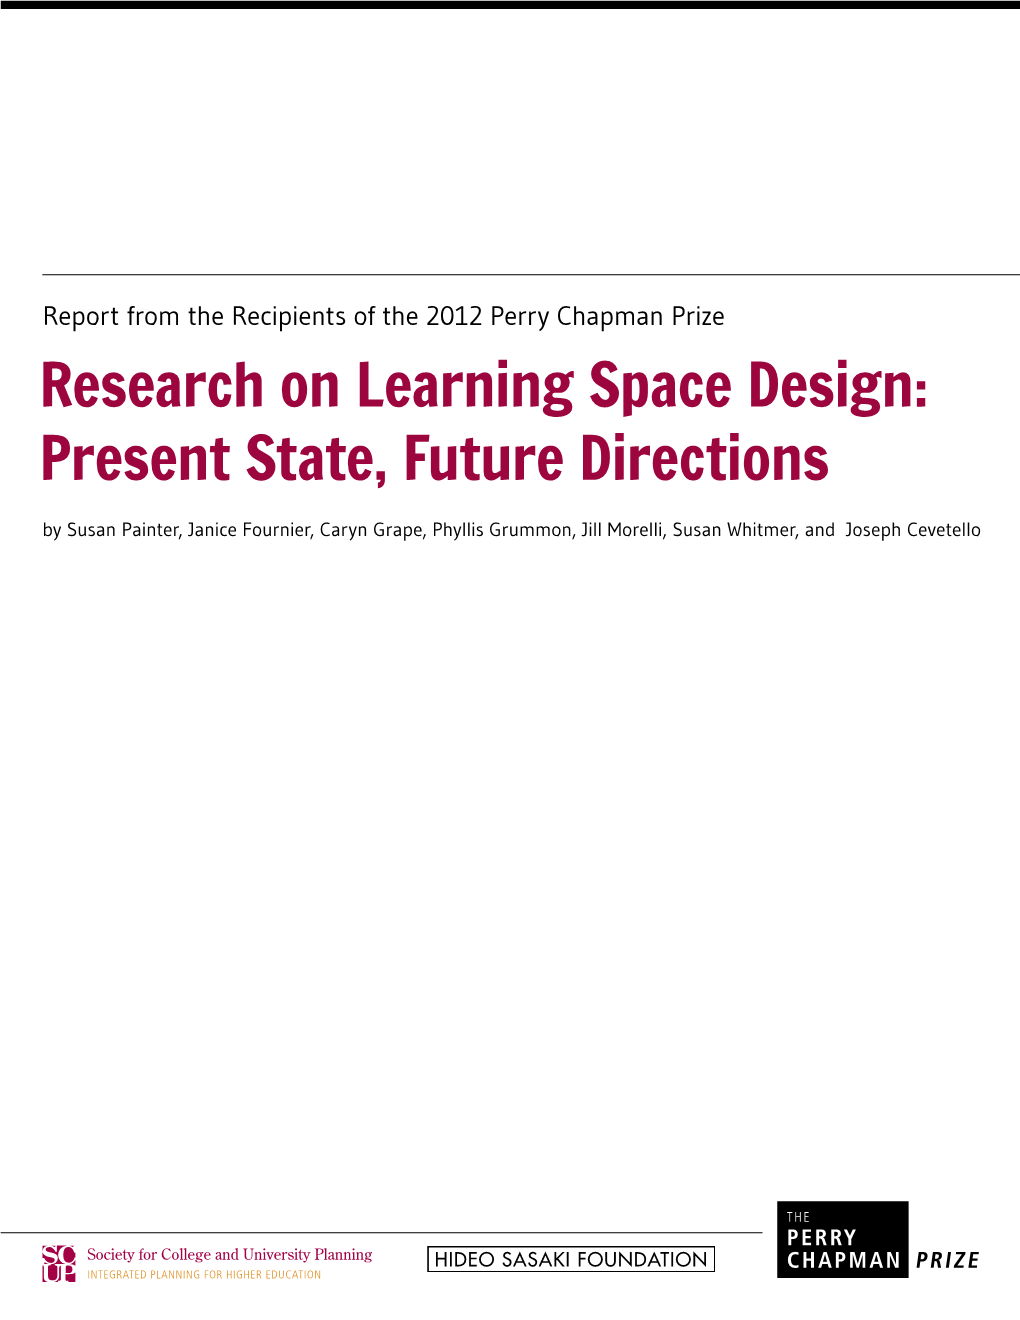 Research on Learning Space Design: Present State, Future Directions